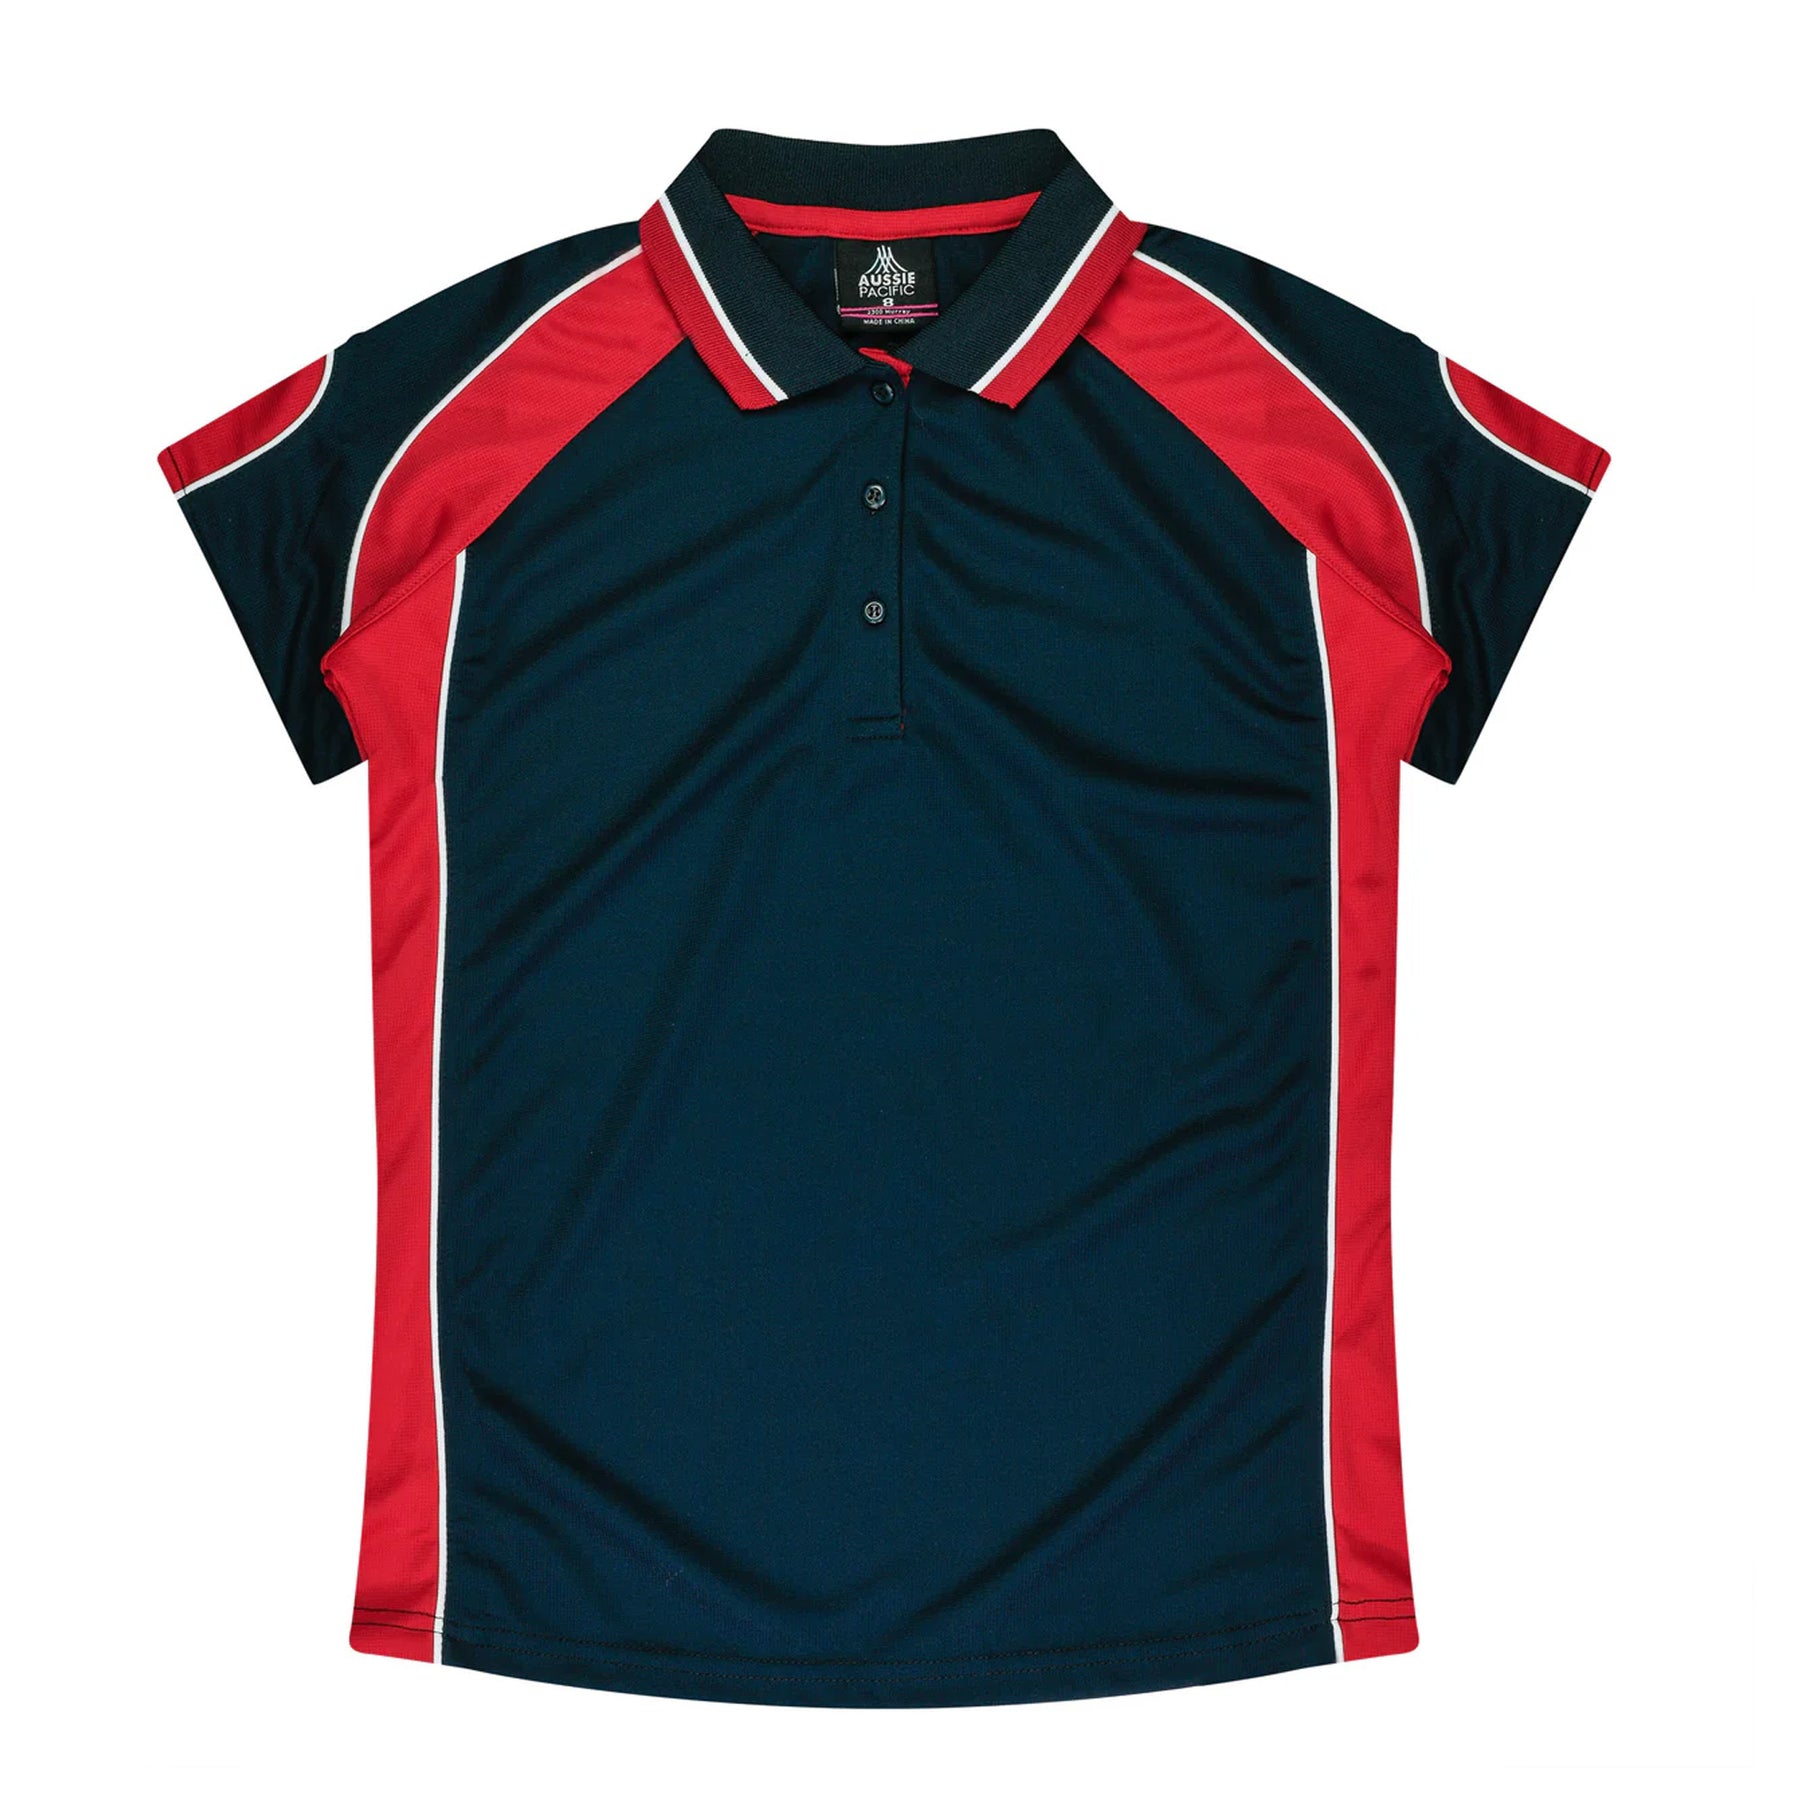 aussie pacific murray ladies polo in navy red